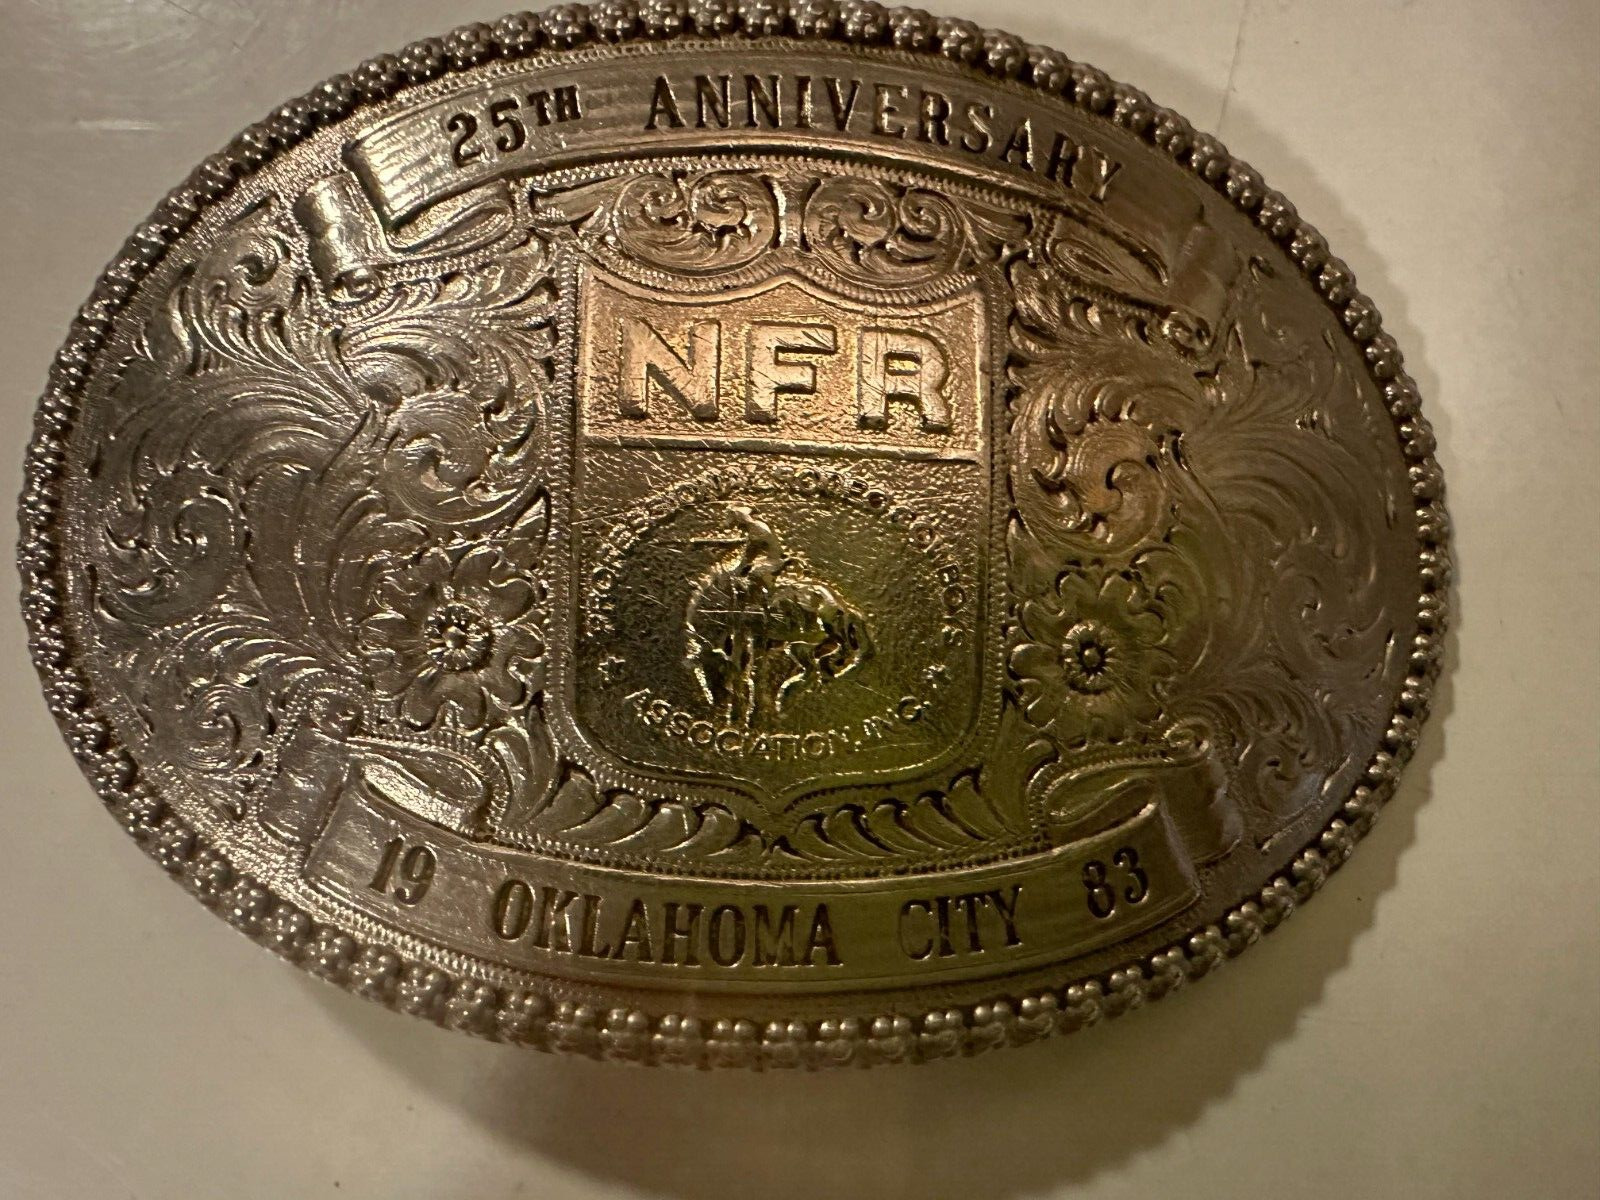 1983 NFR 25th Anniversary Trophy Belt Buckle, Gist Sterling Silver Overlay